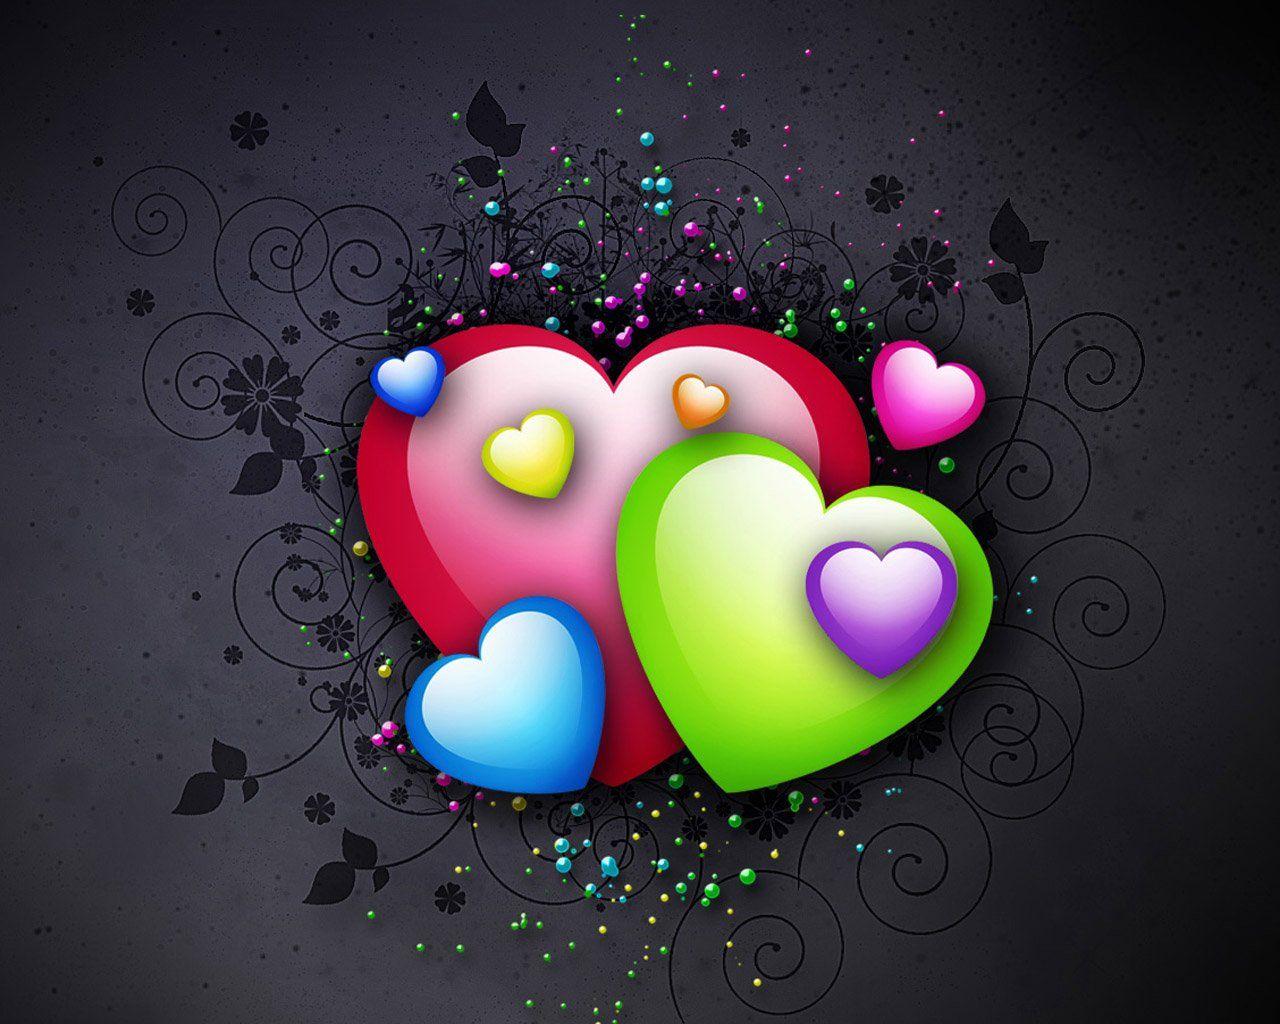 abstract falling in love with abstract background wallpaper free